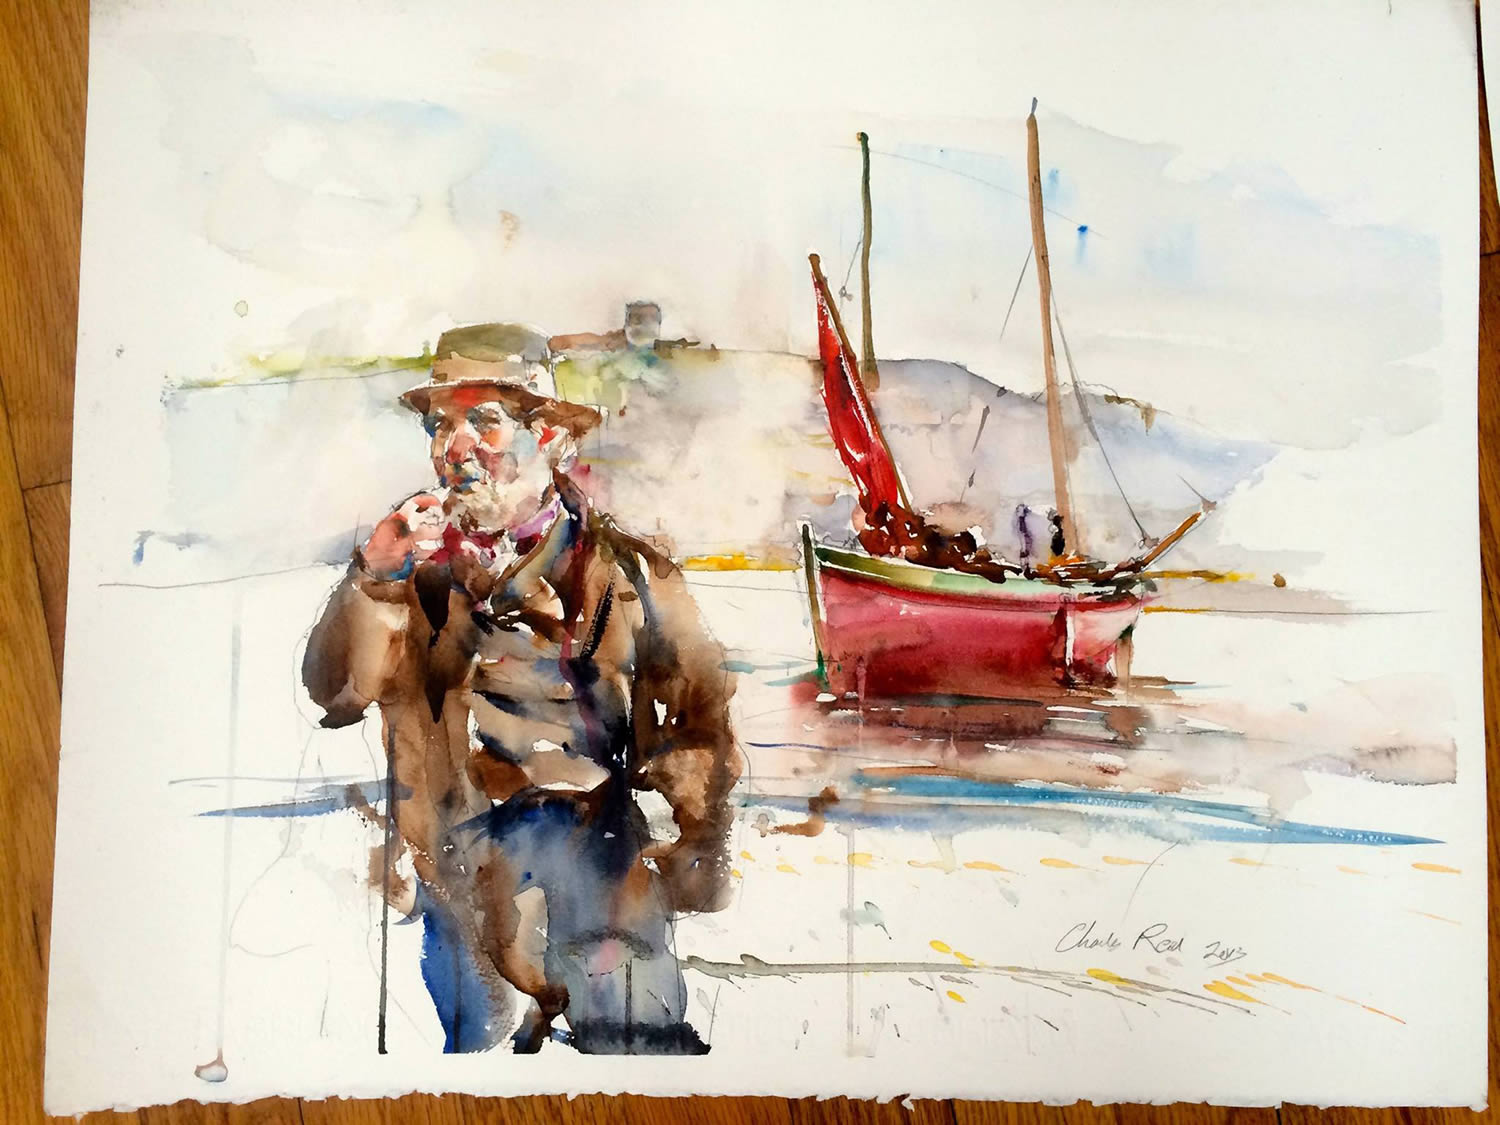 fisherman and red boat, watercolor painting by charles reid